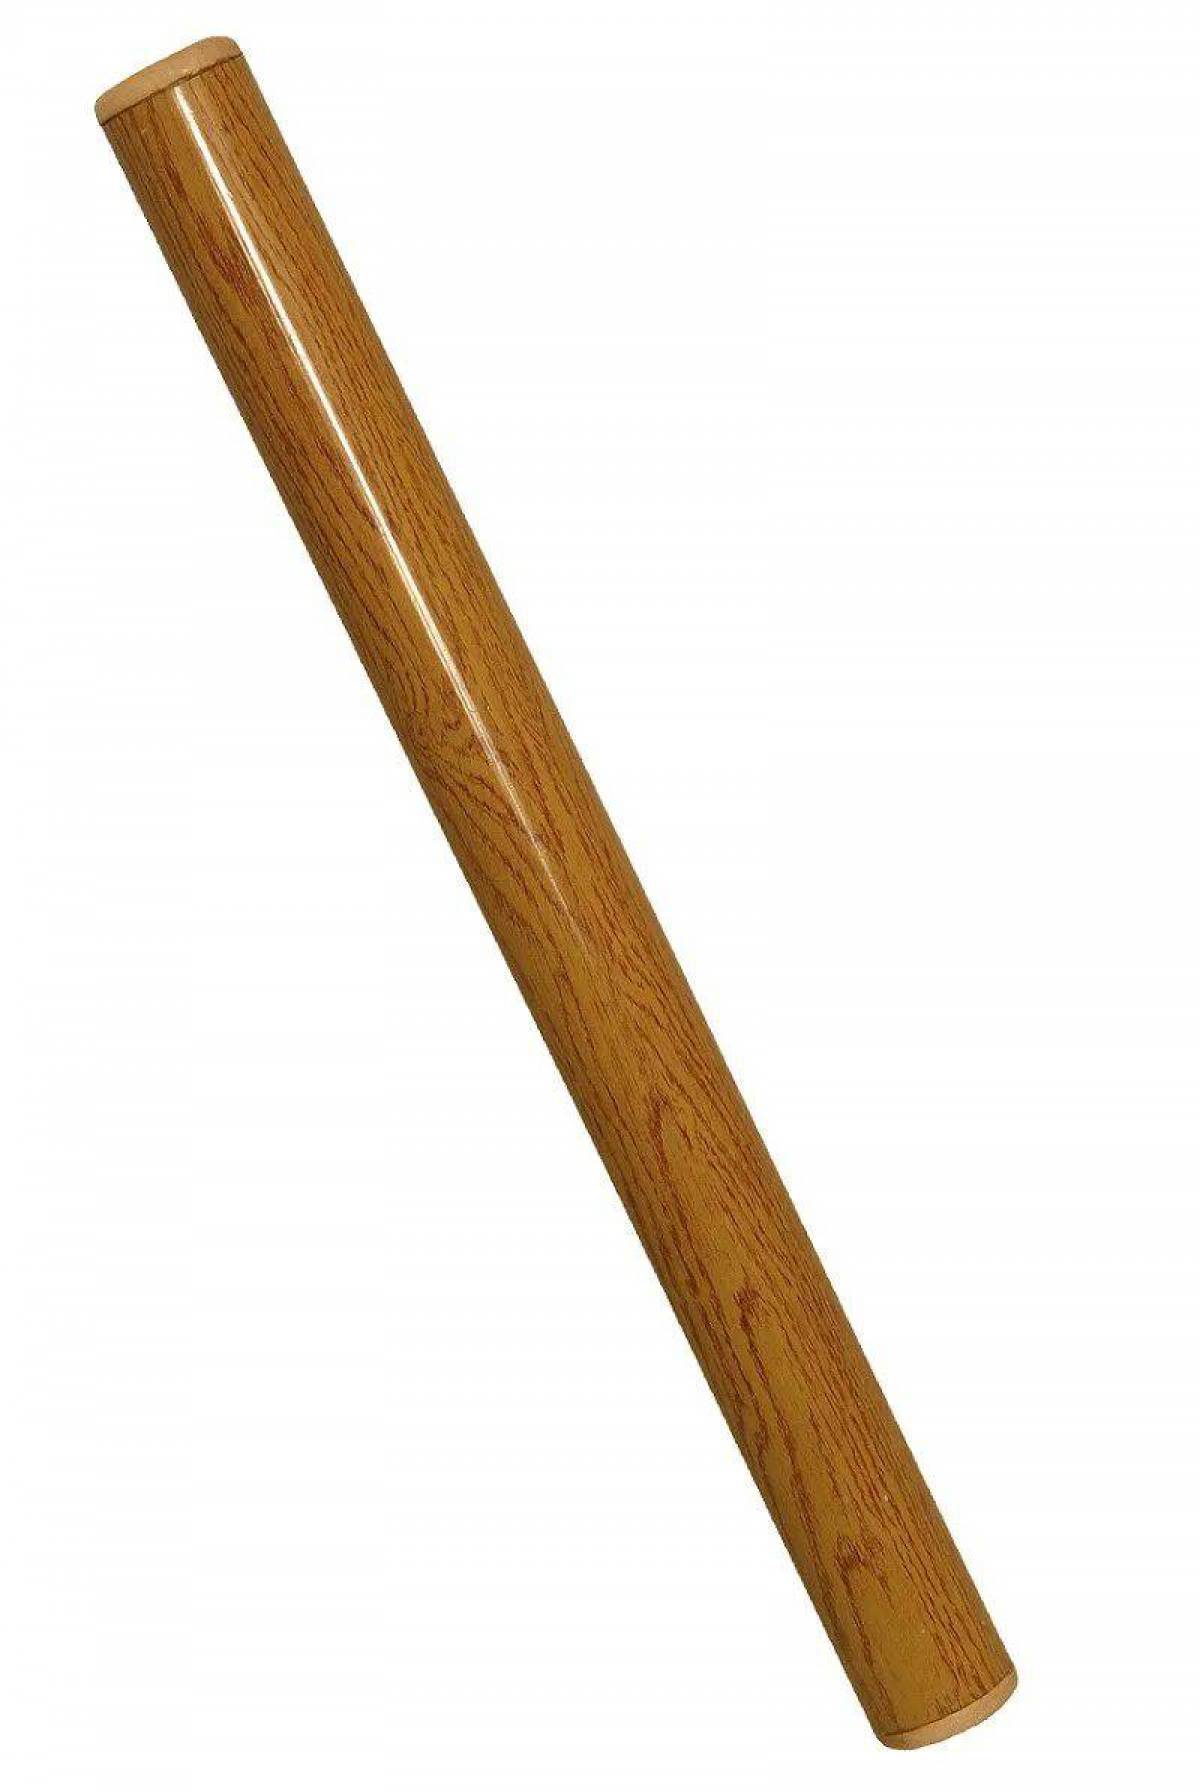 A wooden stick. Палка. Деревянные палочки. Палка деревянная. Деревянная палка на прозрачном фоне.